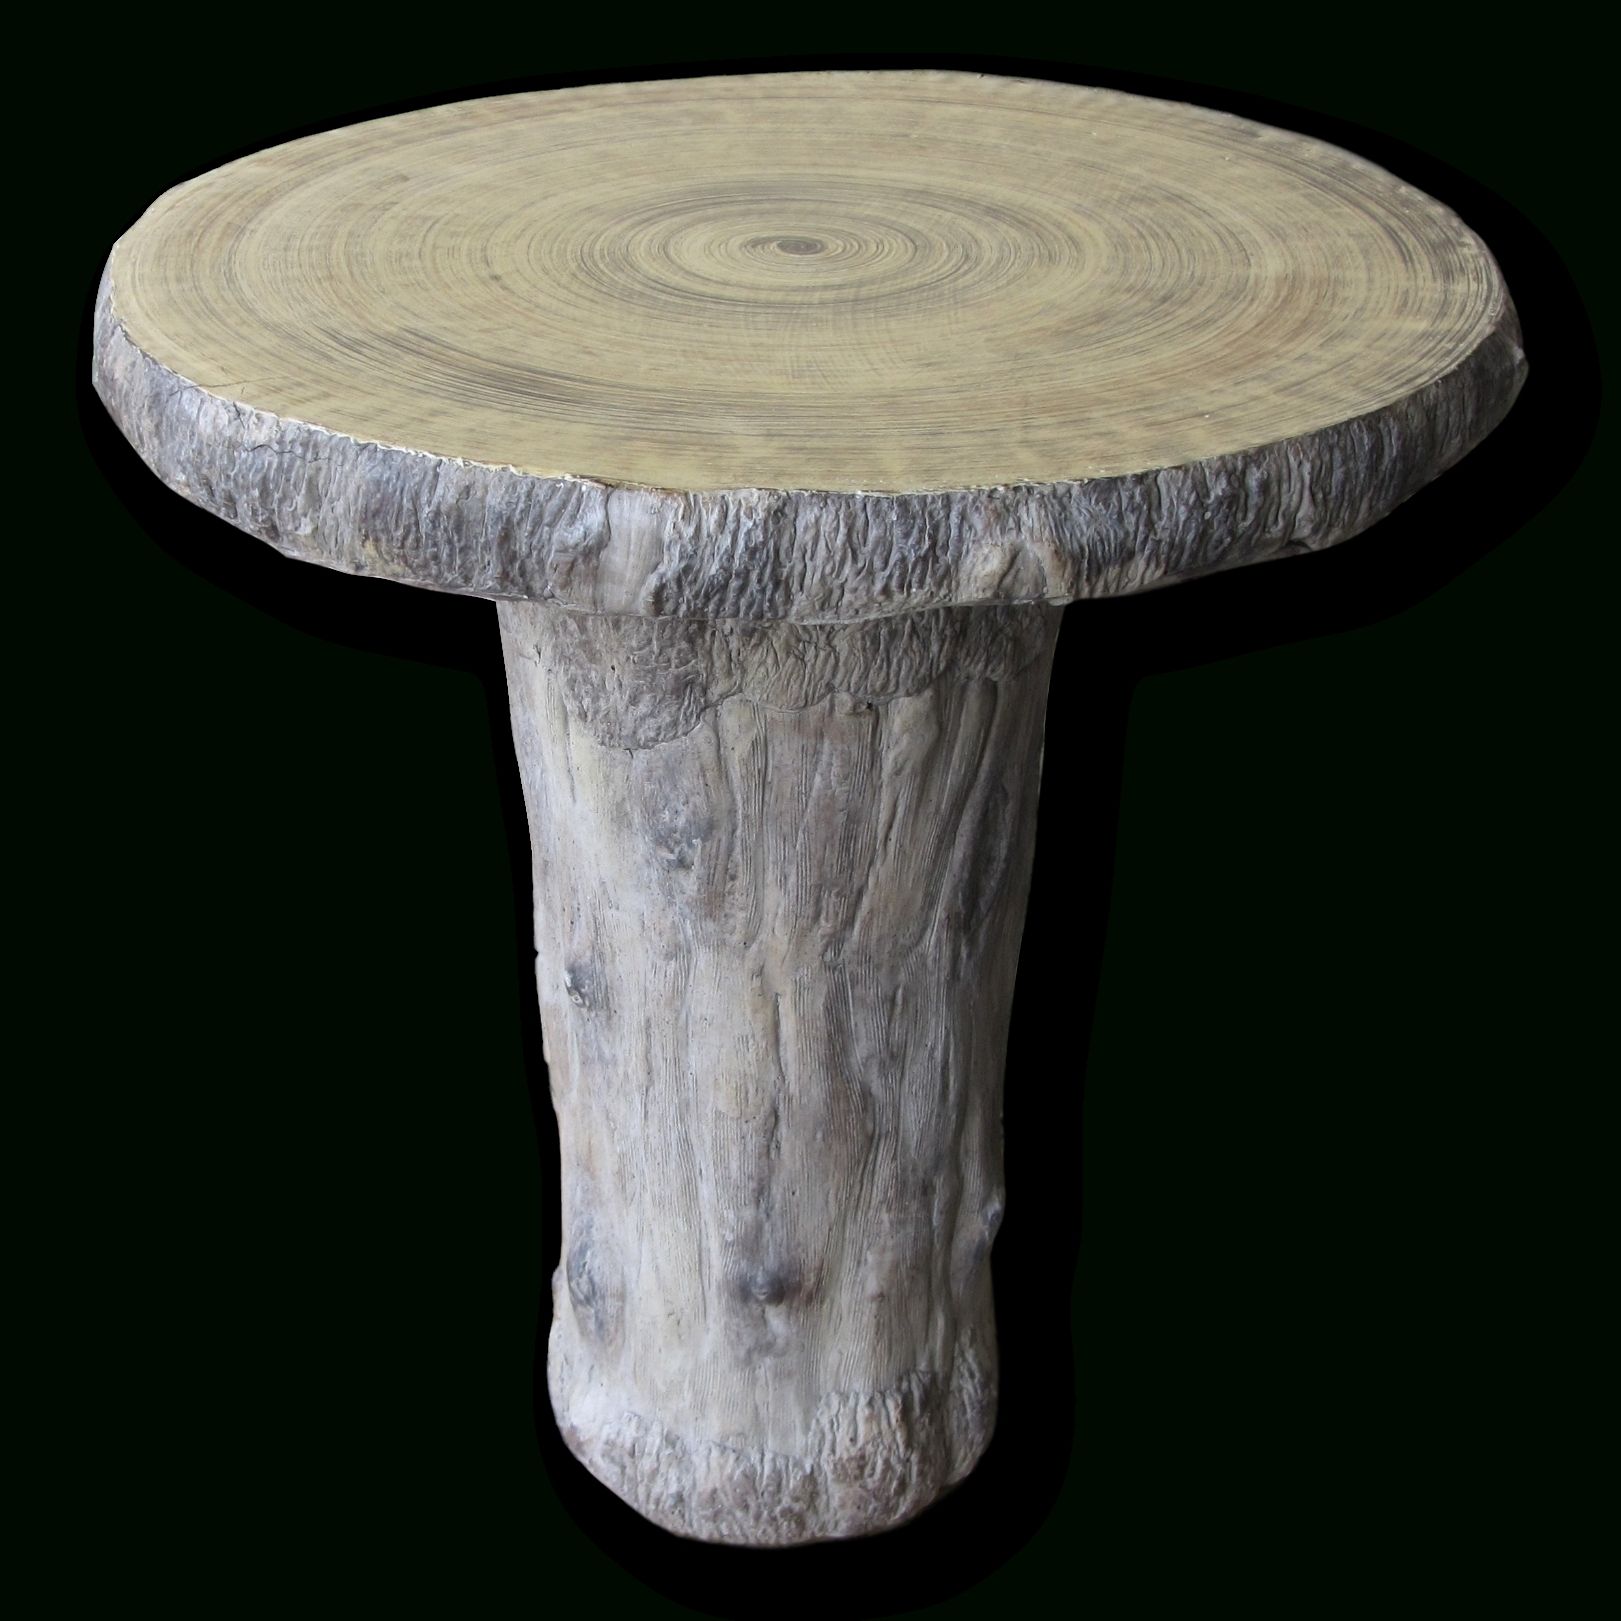 25" Round Faux Bois Table | Faux Bois, Rounding And Composite Material With Regard To Faux Bois Coffee Tables (View 13 of 30)